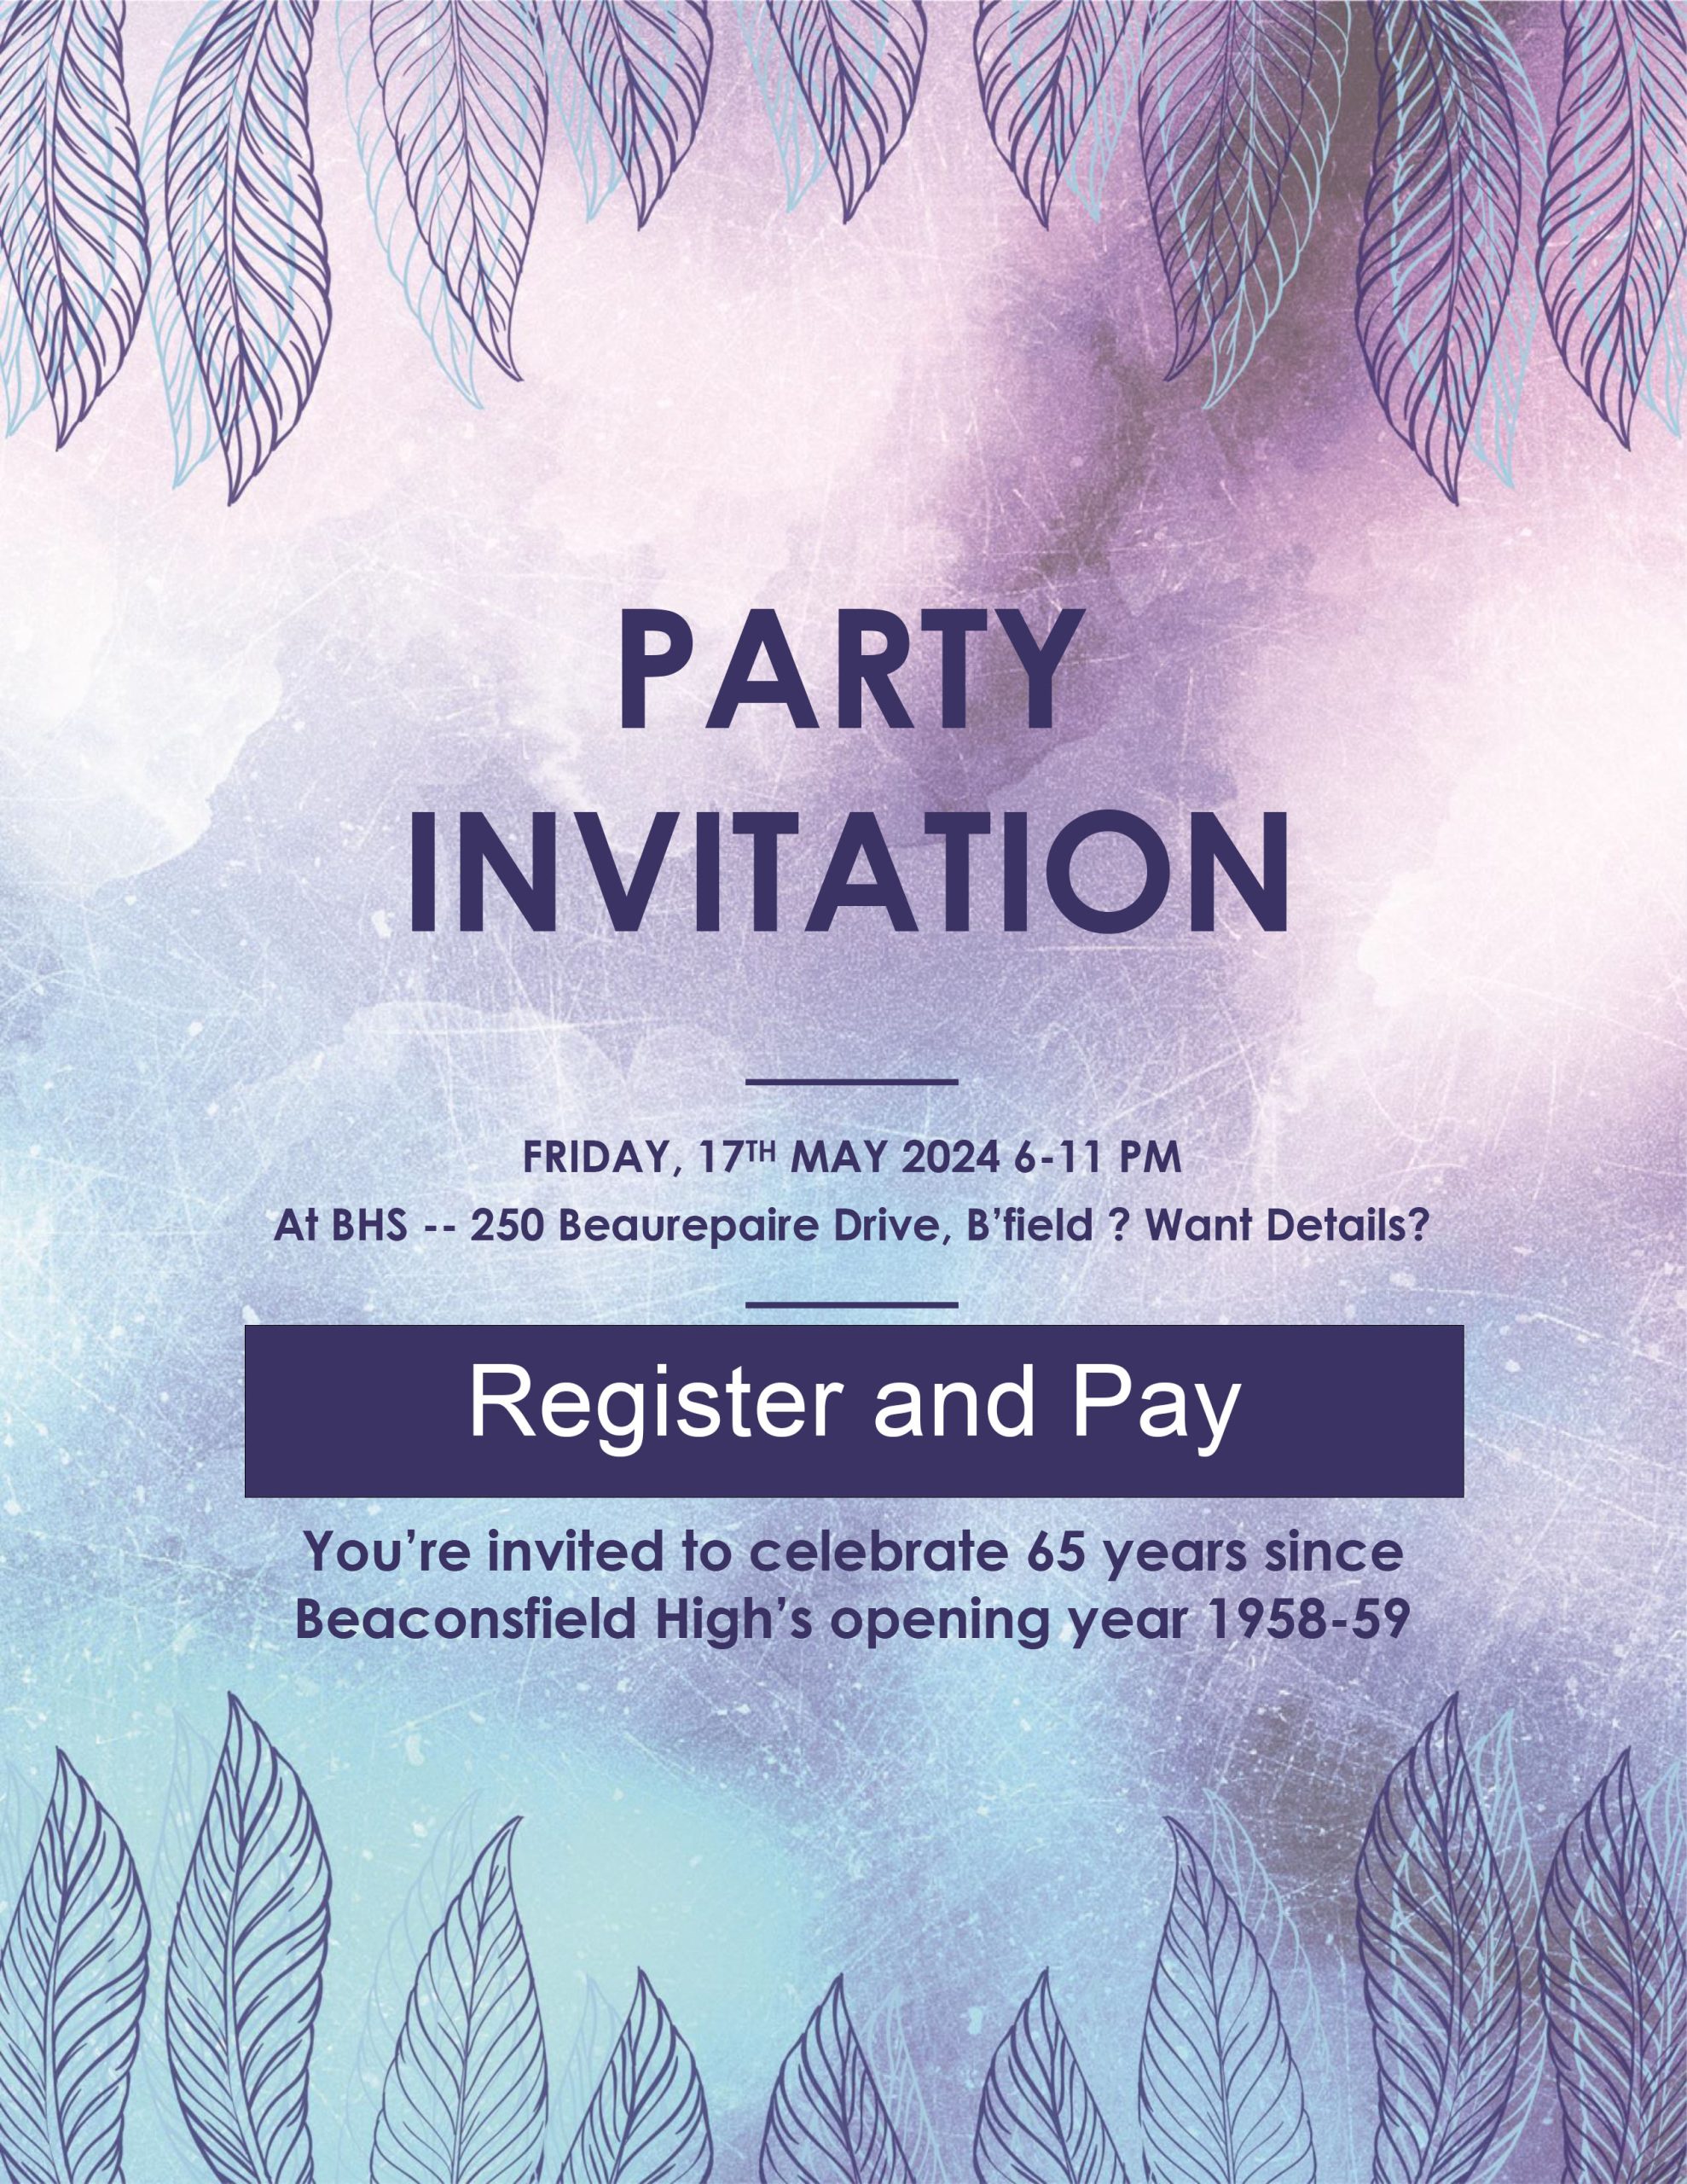 Party Invitation - Friday 17th May 2024 at BHS - 250 Beaurepaire Dr. Beaconsfield You're invited to celebrate 65 years since Beaconsfield High's opening year 1958-59